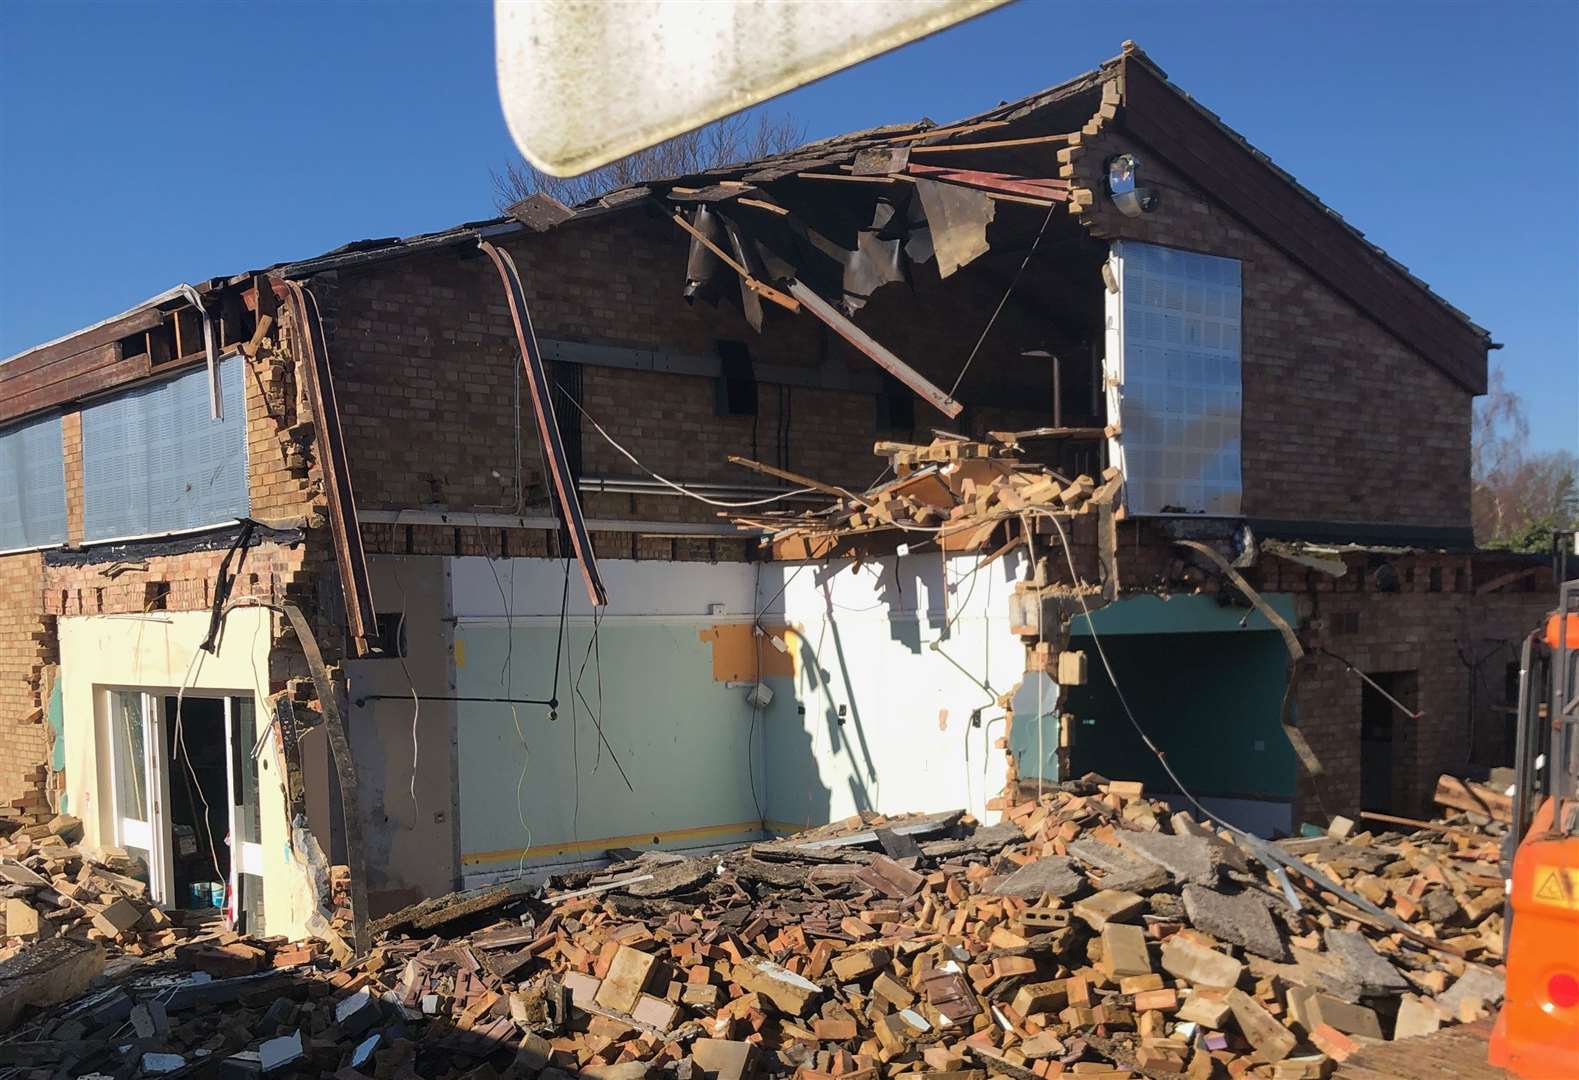 Bockhanger Community Centre was knocked down in 2019